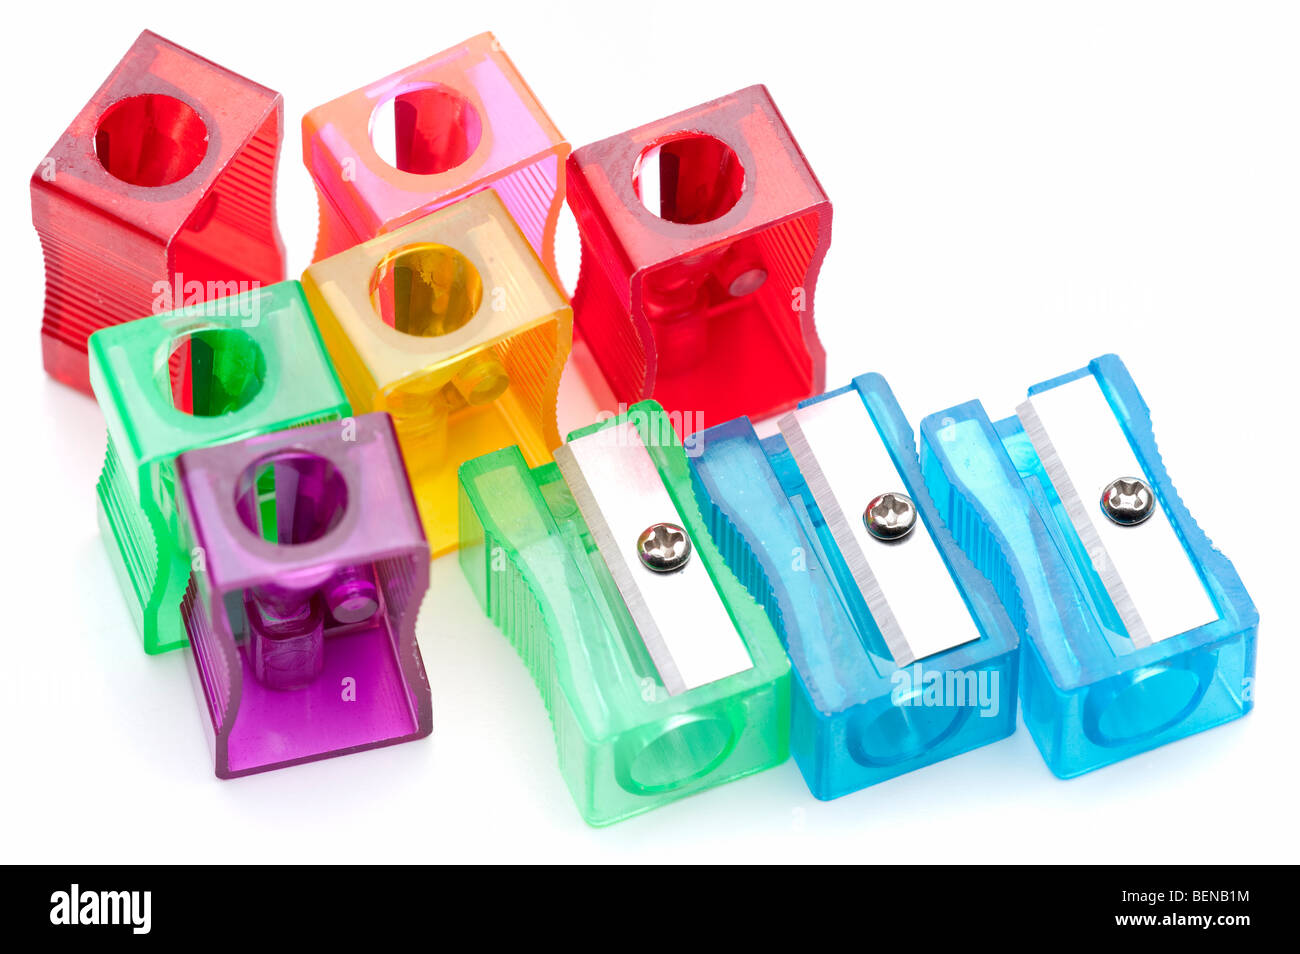 Pack of 20 School Plastic Pencil Sharpeners - Assorted Colors